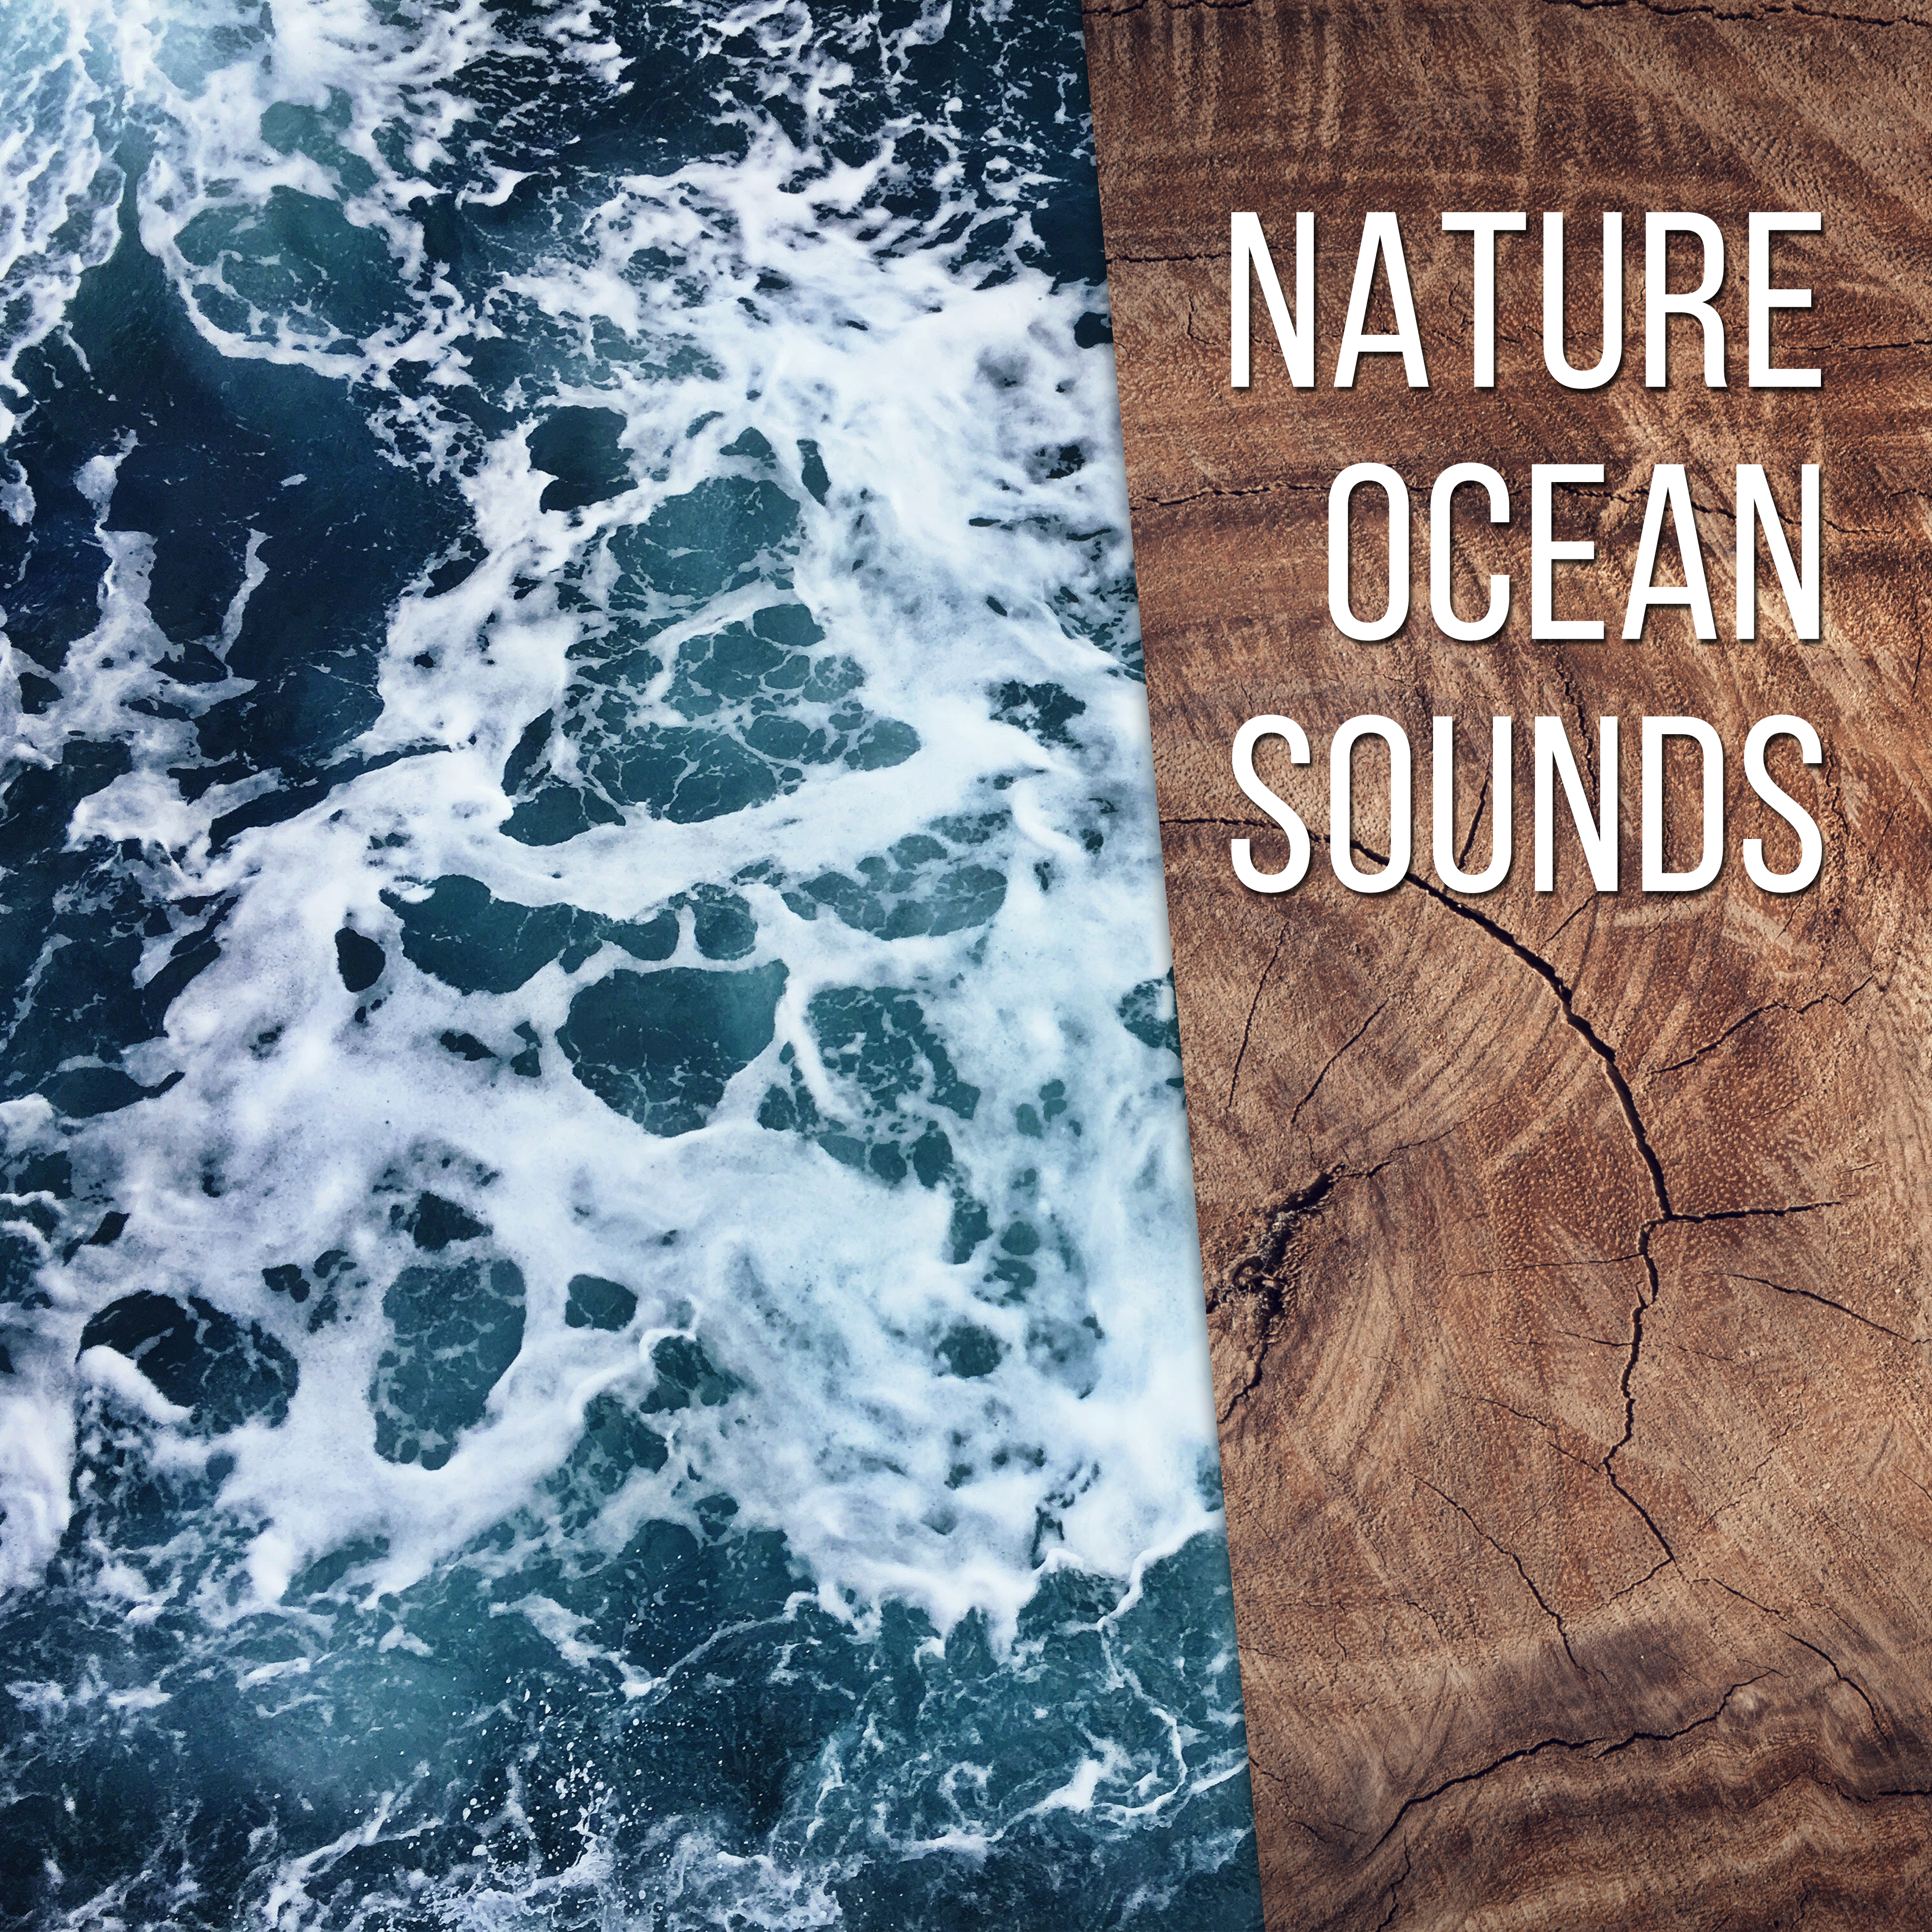 Nature Ocean Sounds  Music to Calm Down  Relax, Ocean Waves, Sea Sounds, Water Relaxation